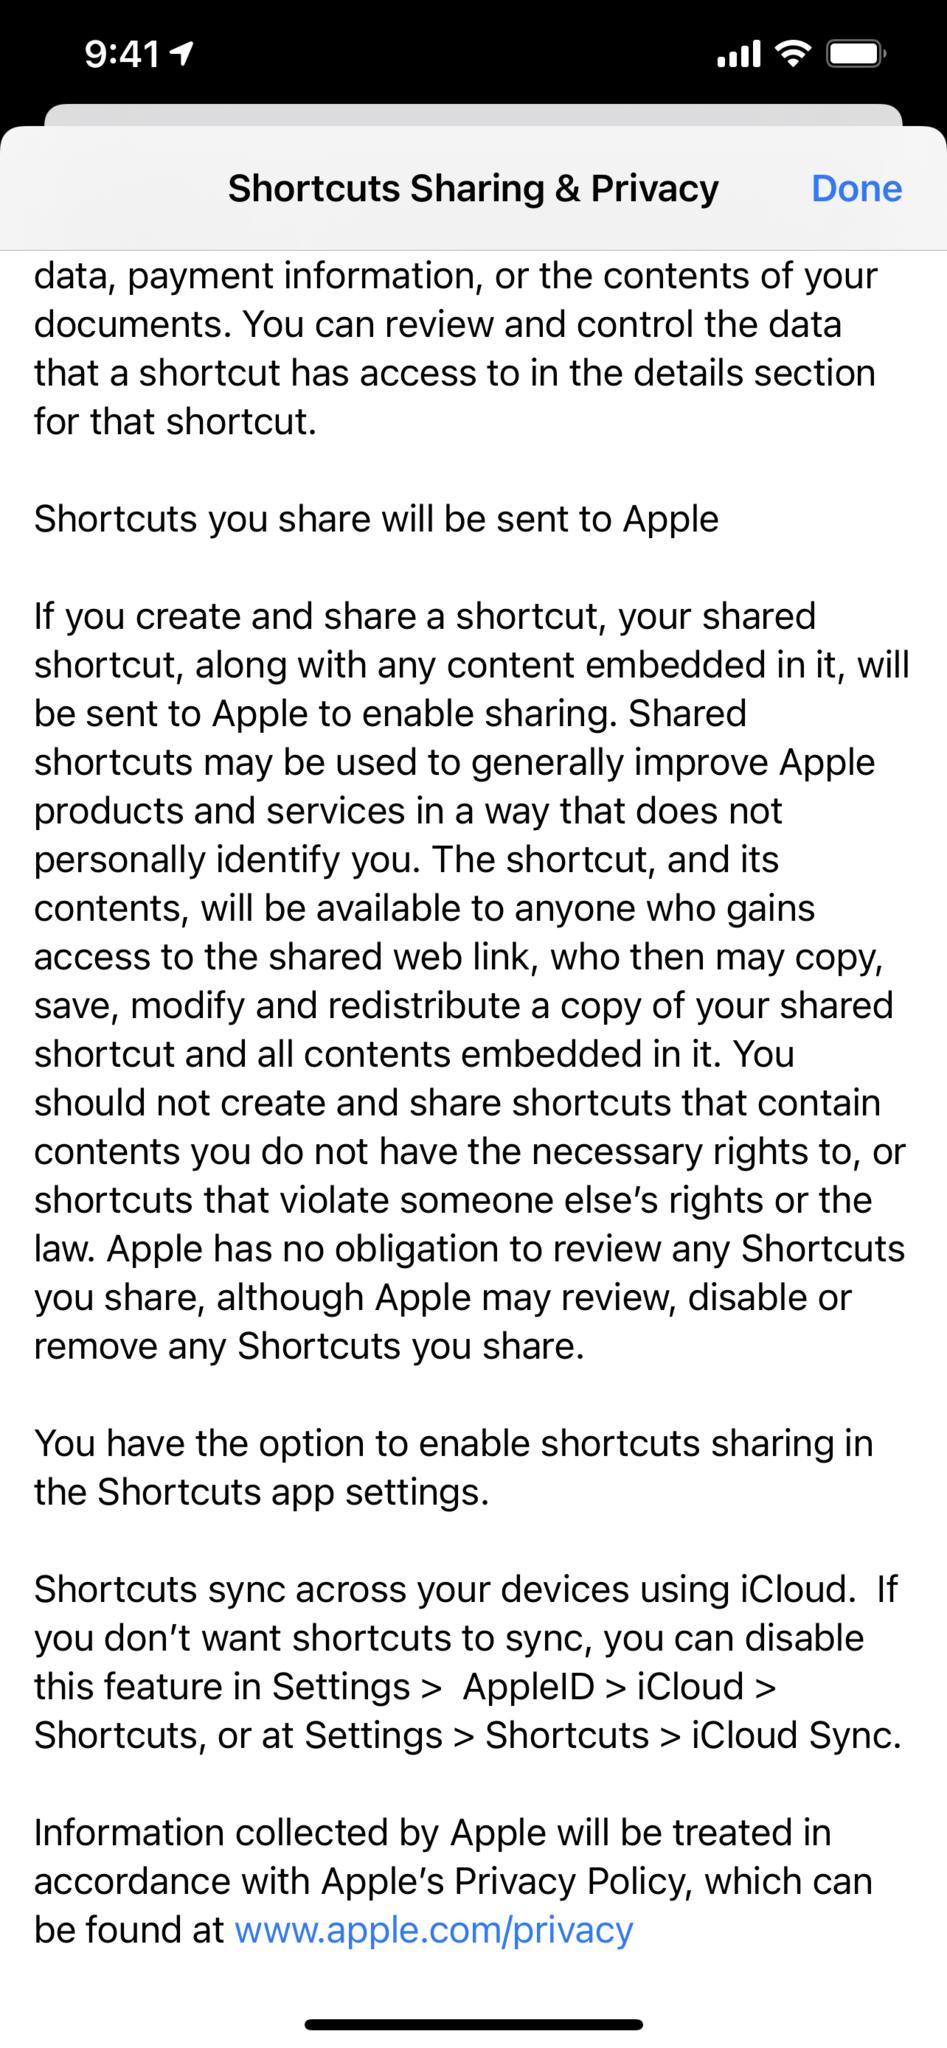 Screenshot showing the second half of the Shortcuts Sharing & Privacy Policy sub-page.